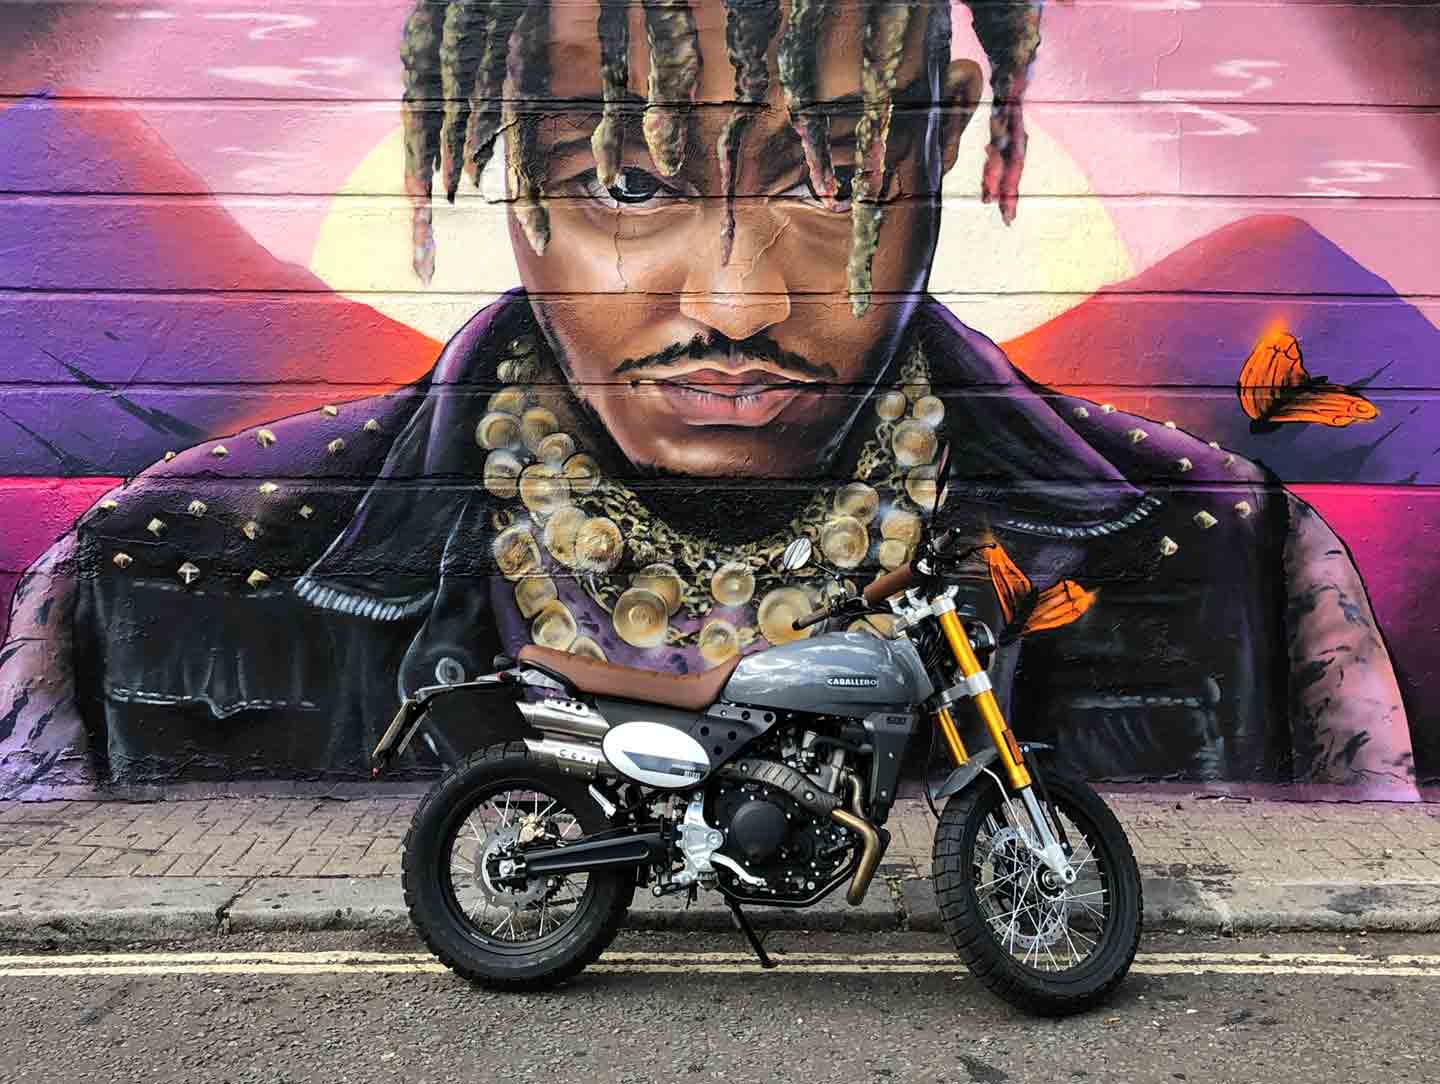 Caballero scrambler deluxe motorcycle in front of graffiti